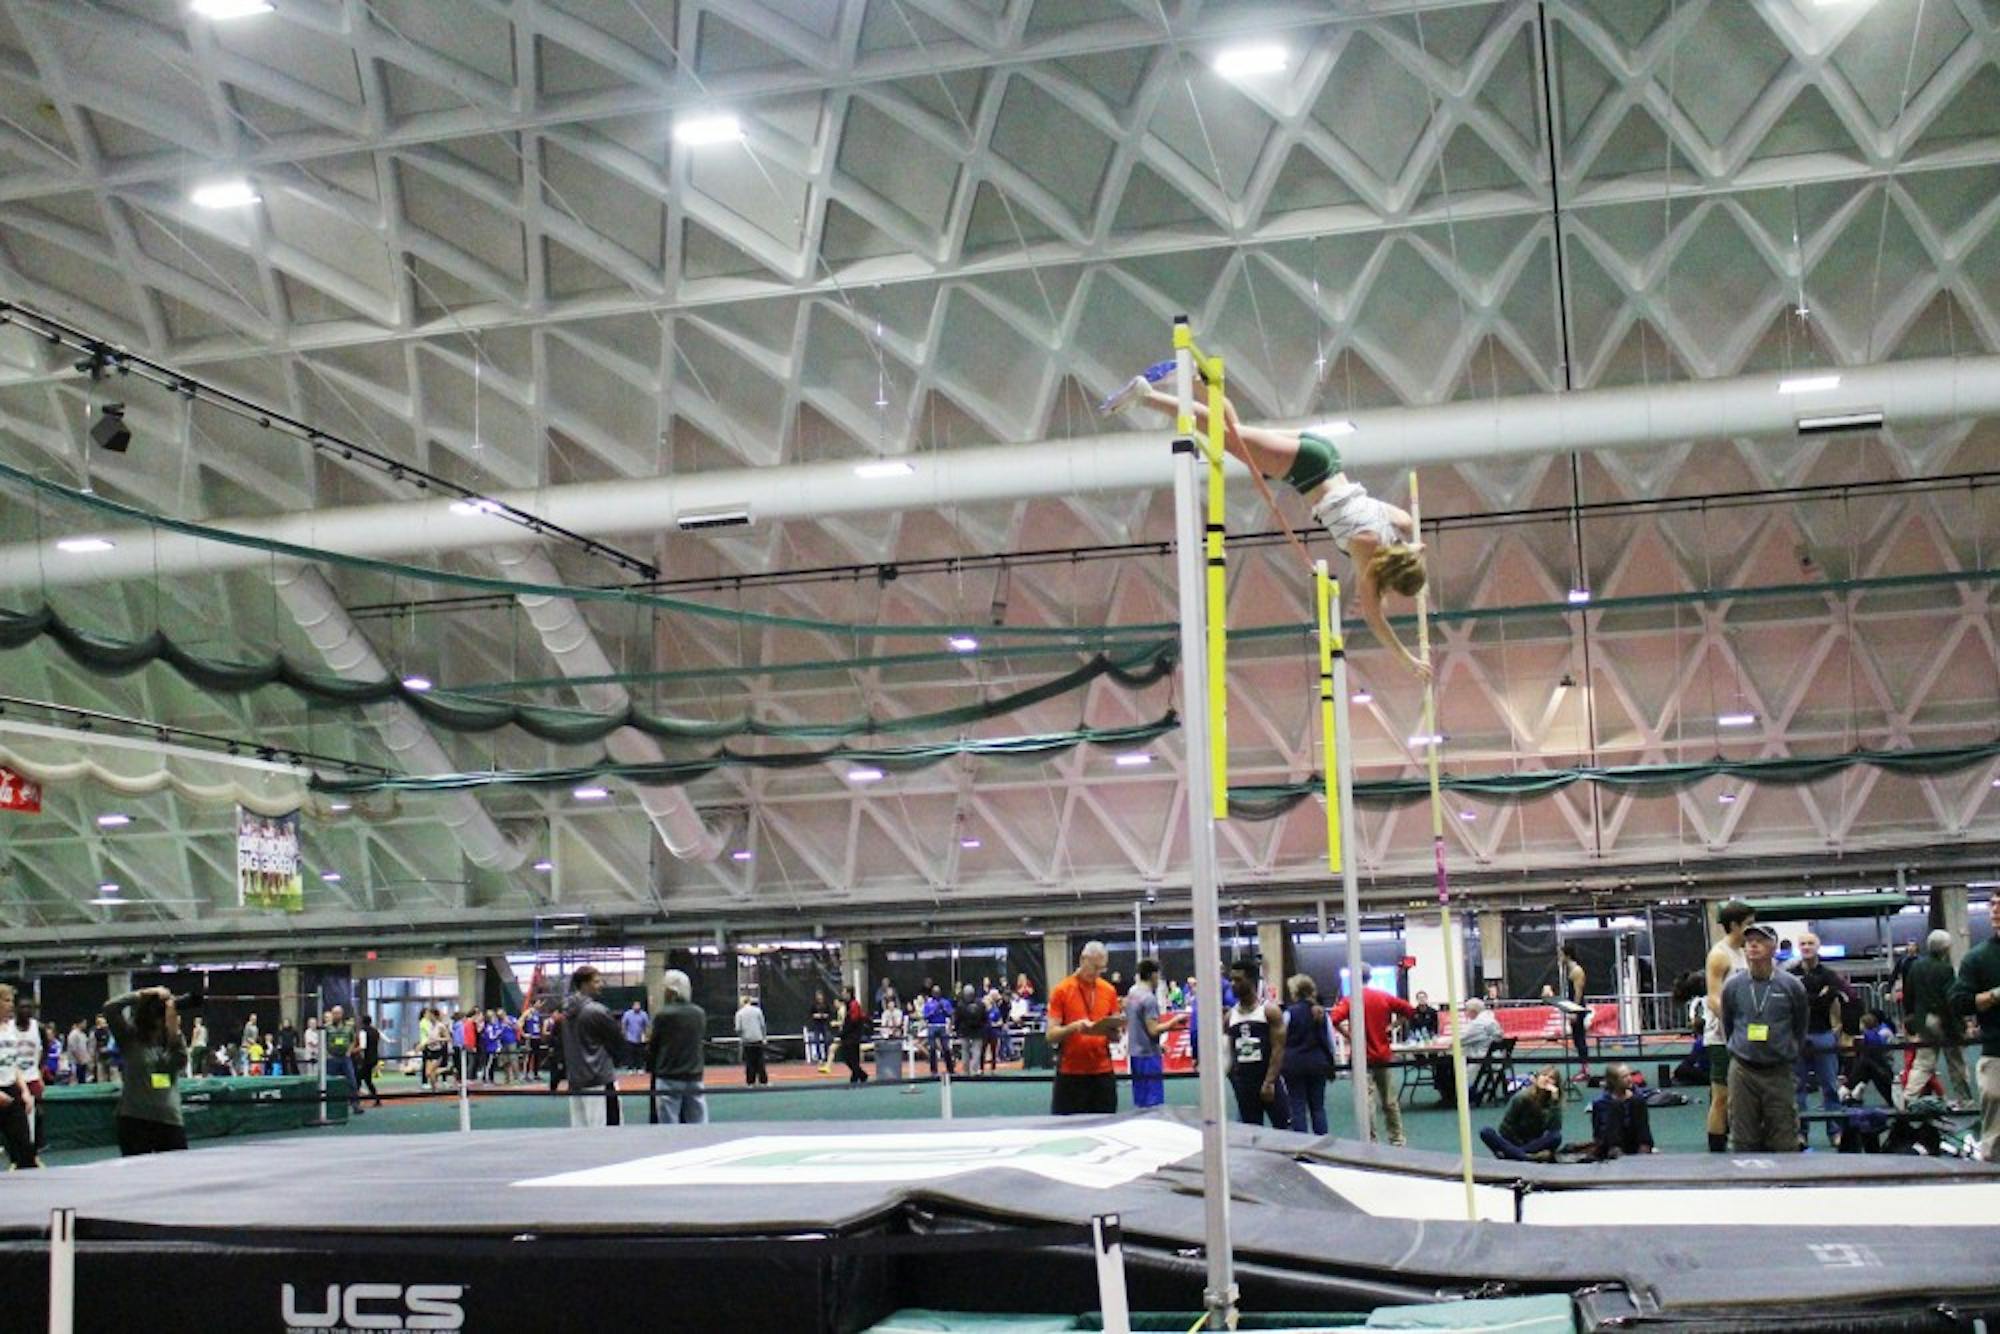 Track and field saw some impressive individual performances at the Dartmouth Indoor Classic.